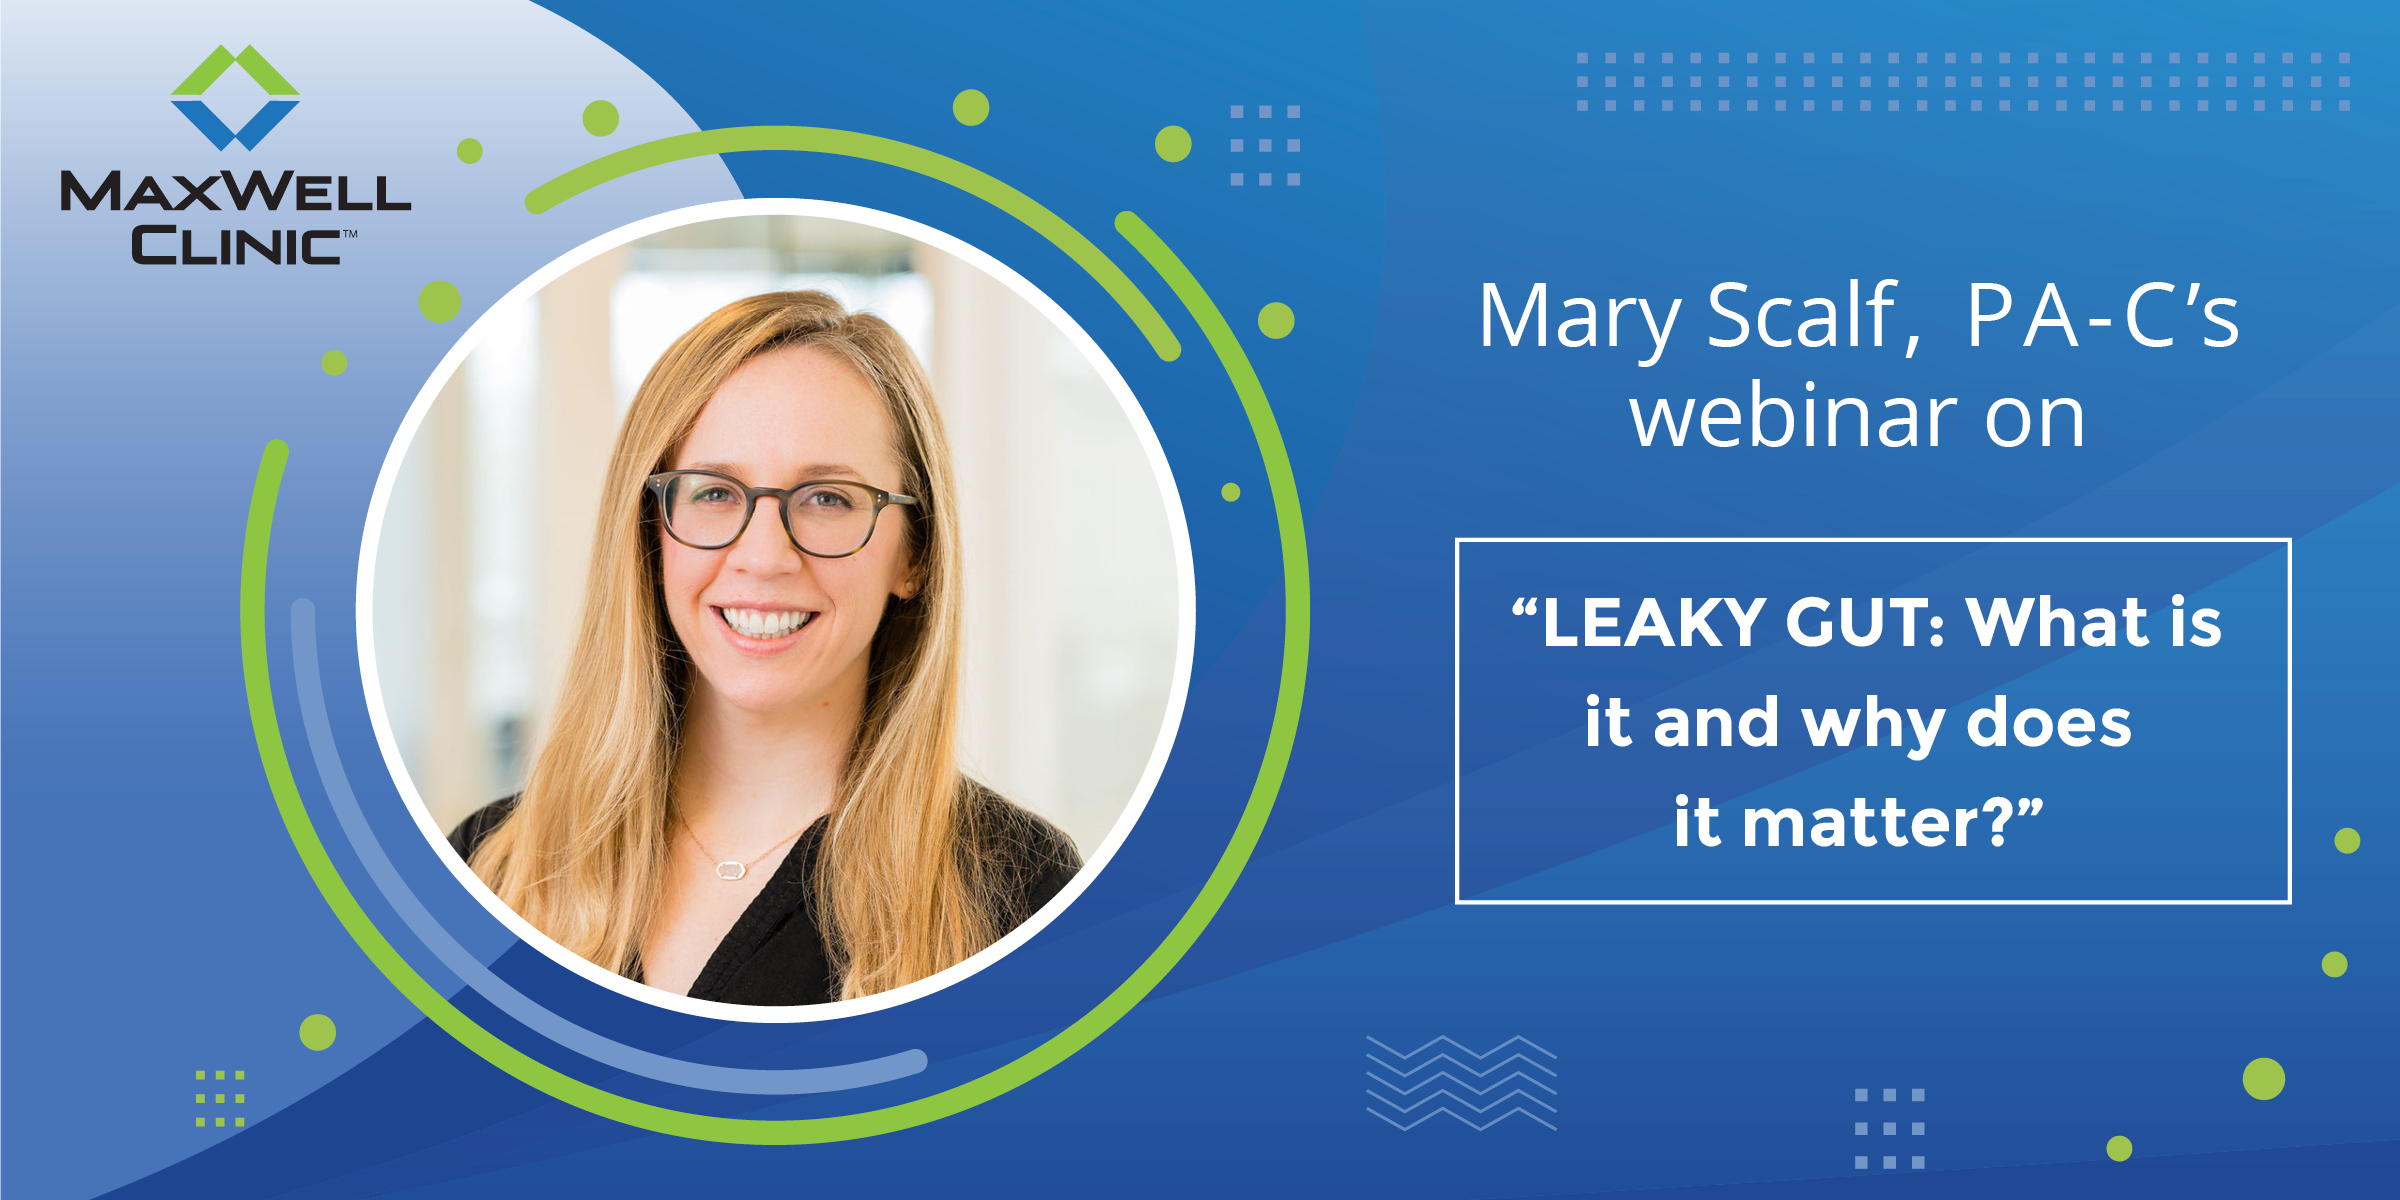 Leaky Gut: What Is It and Why Does It Matter? with Mary Scalf, PA-C